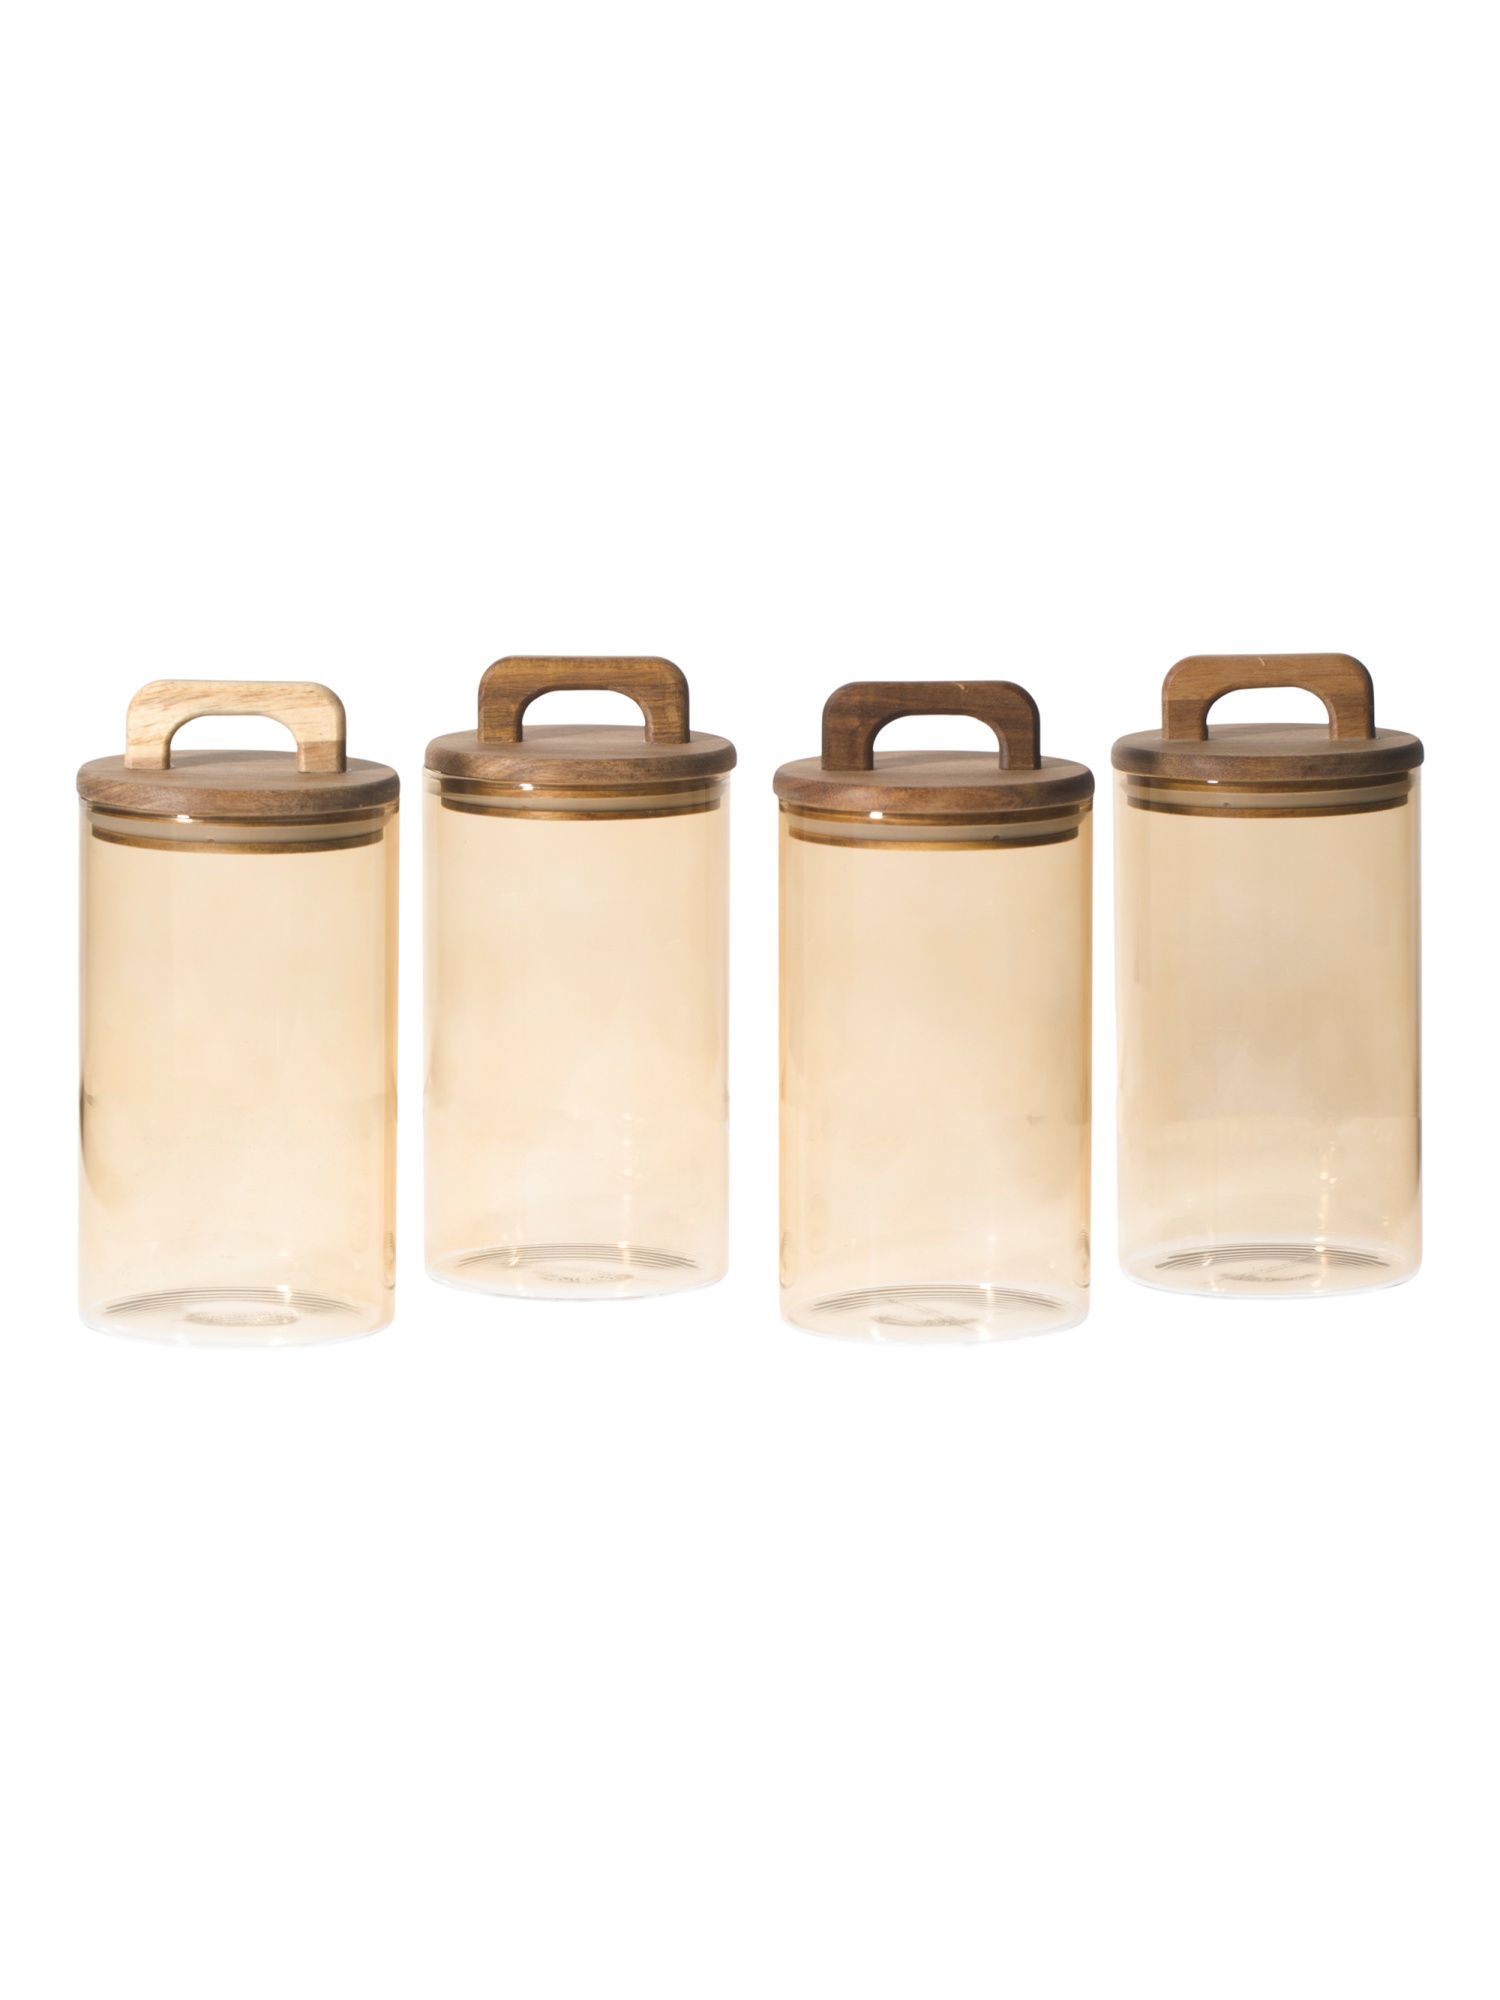 4pk 44oz Wooden Handle Pantry Canisters | TJ Maxx